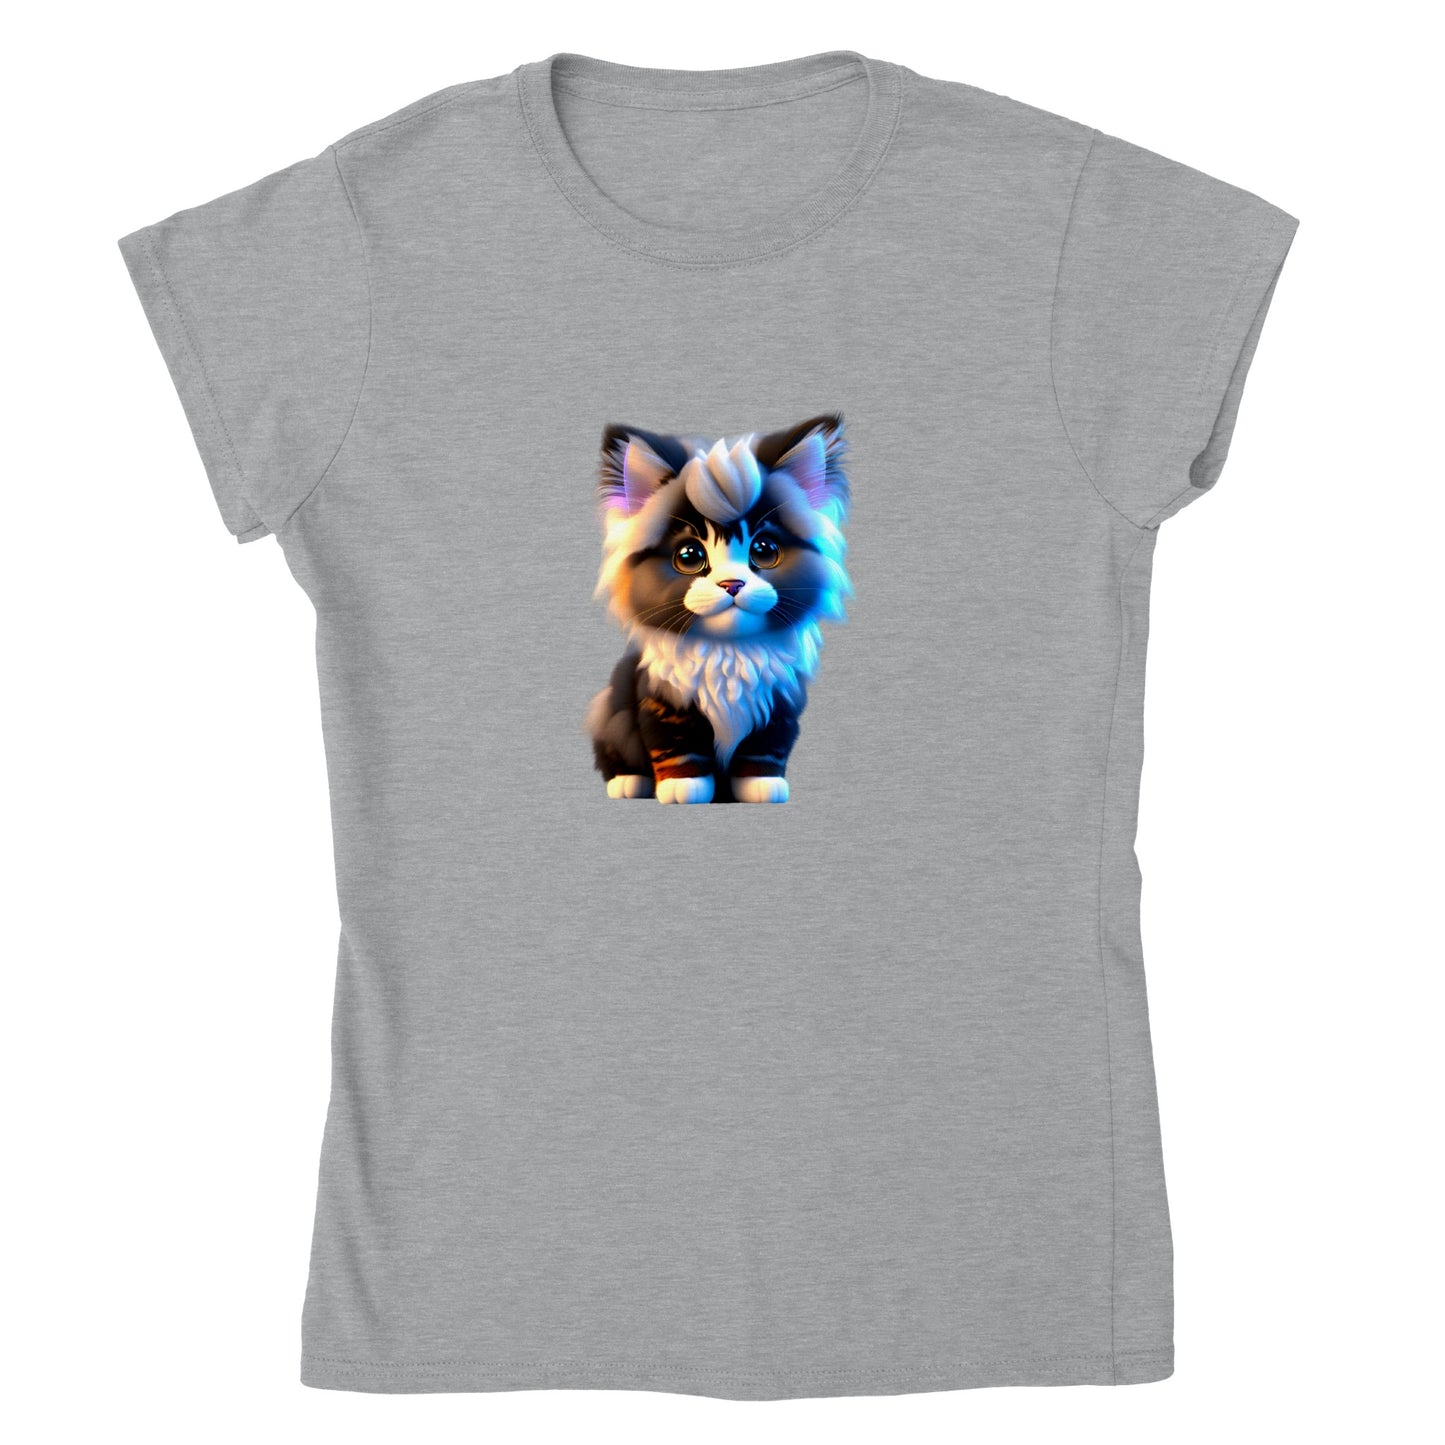 Adorable, Cool, Cute Cats and Kittens Toy - Classic Women’s Crewneck T-Shirt 10